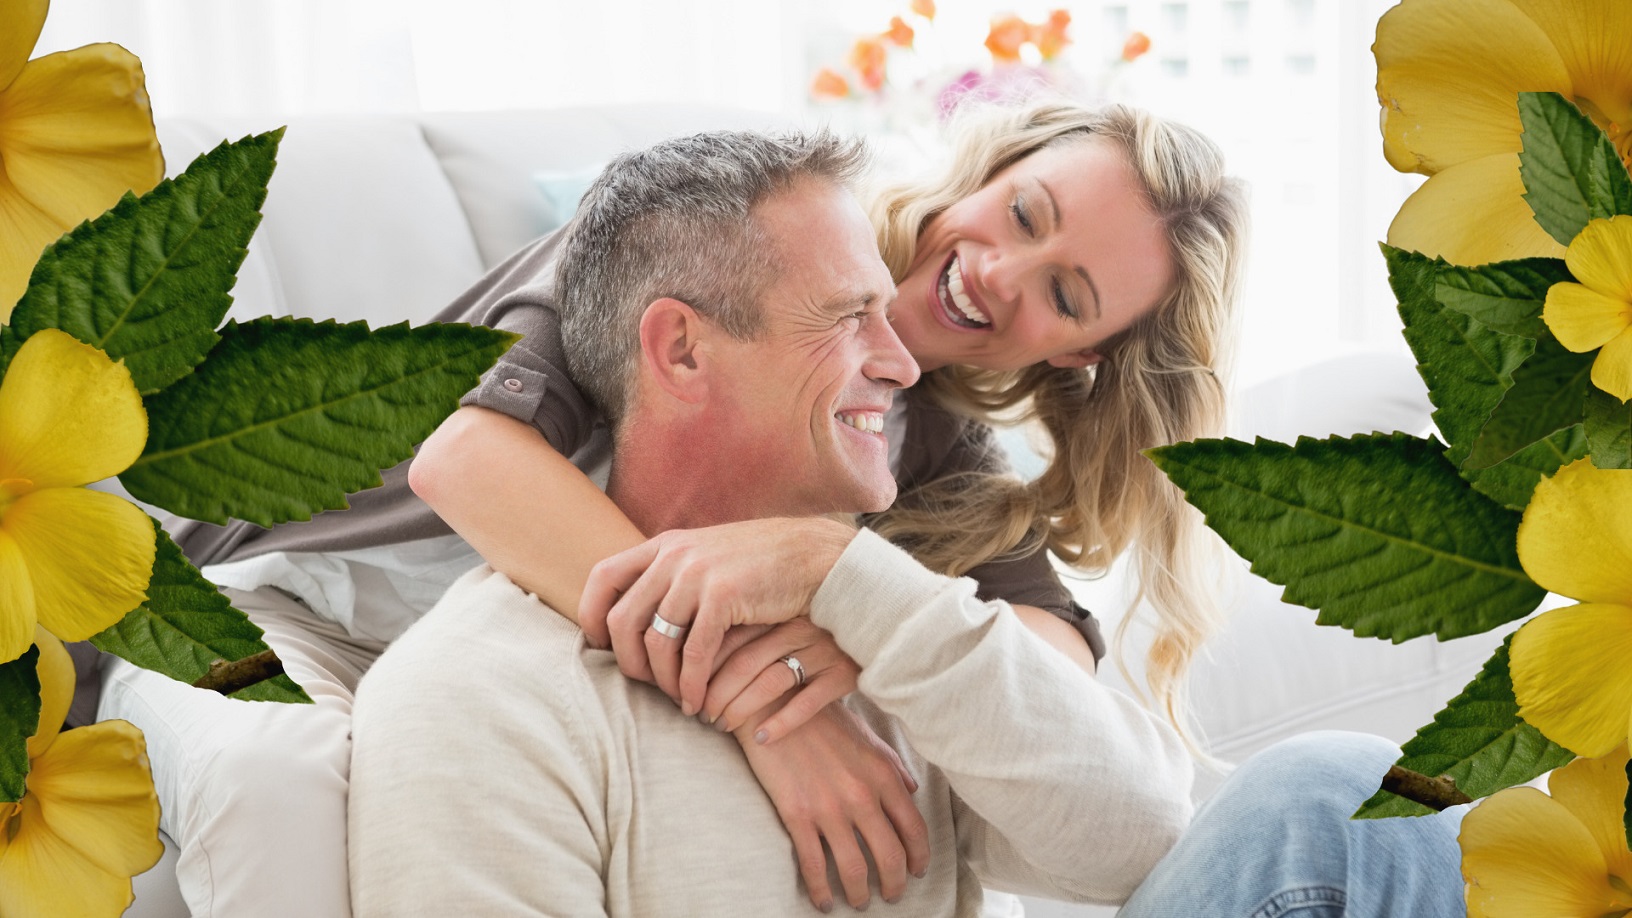 Novel Damiana Extract For Him and Her